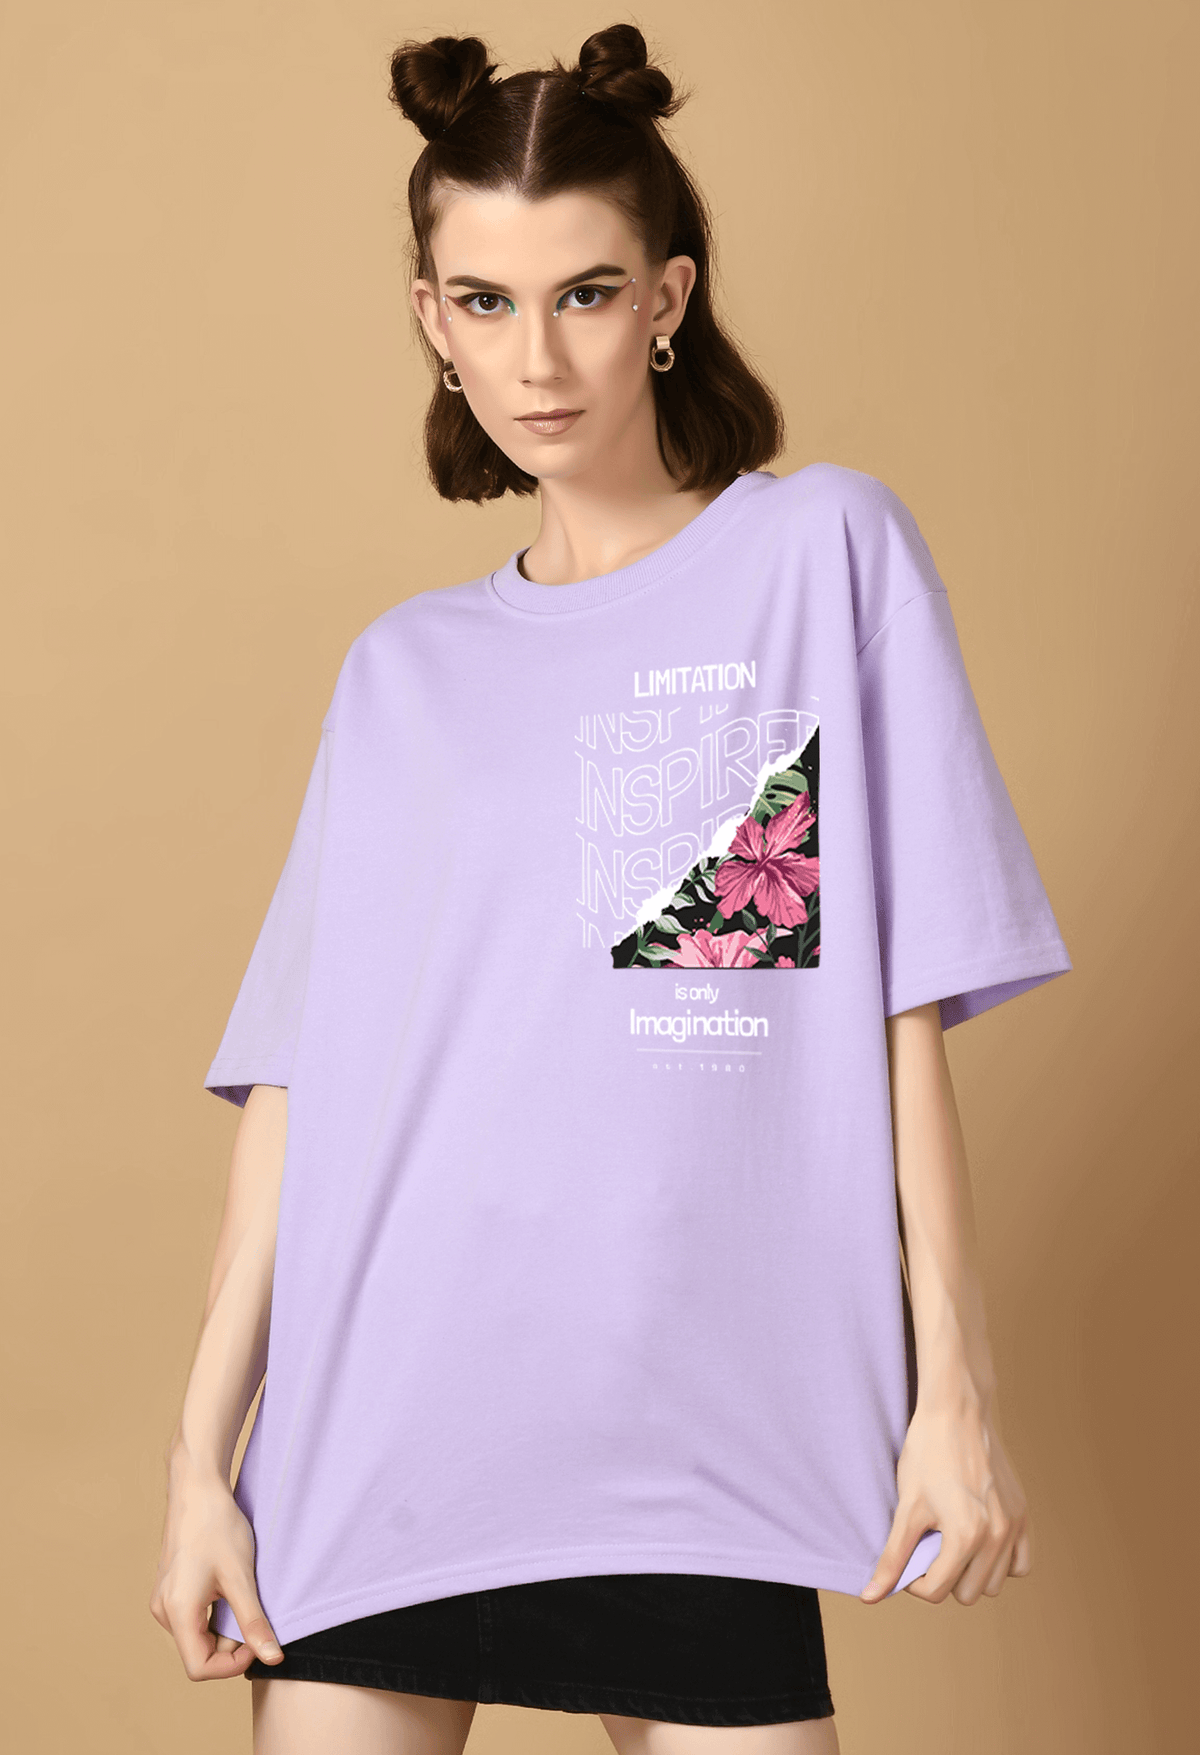 Limitation printed lavender color oversized t-shirt by offmint